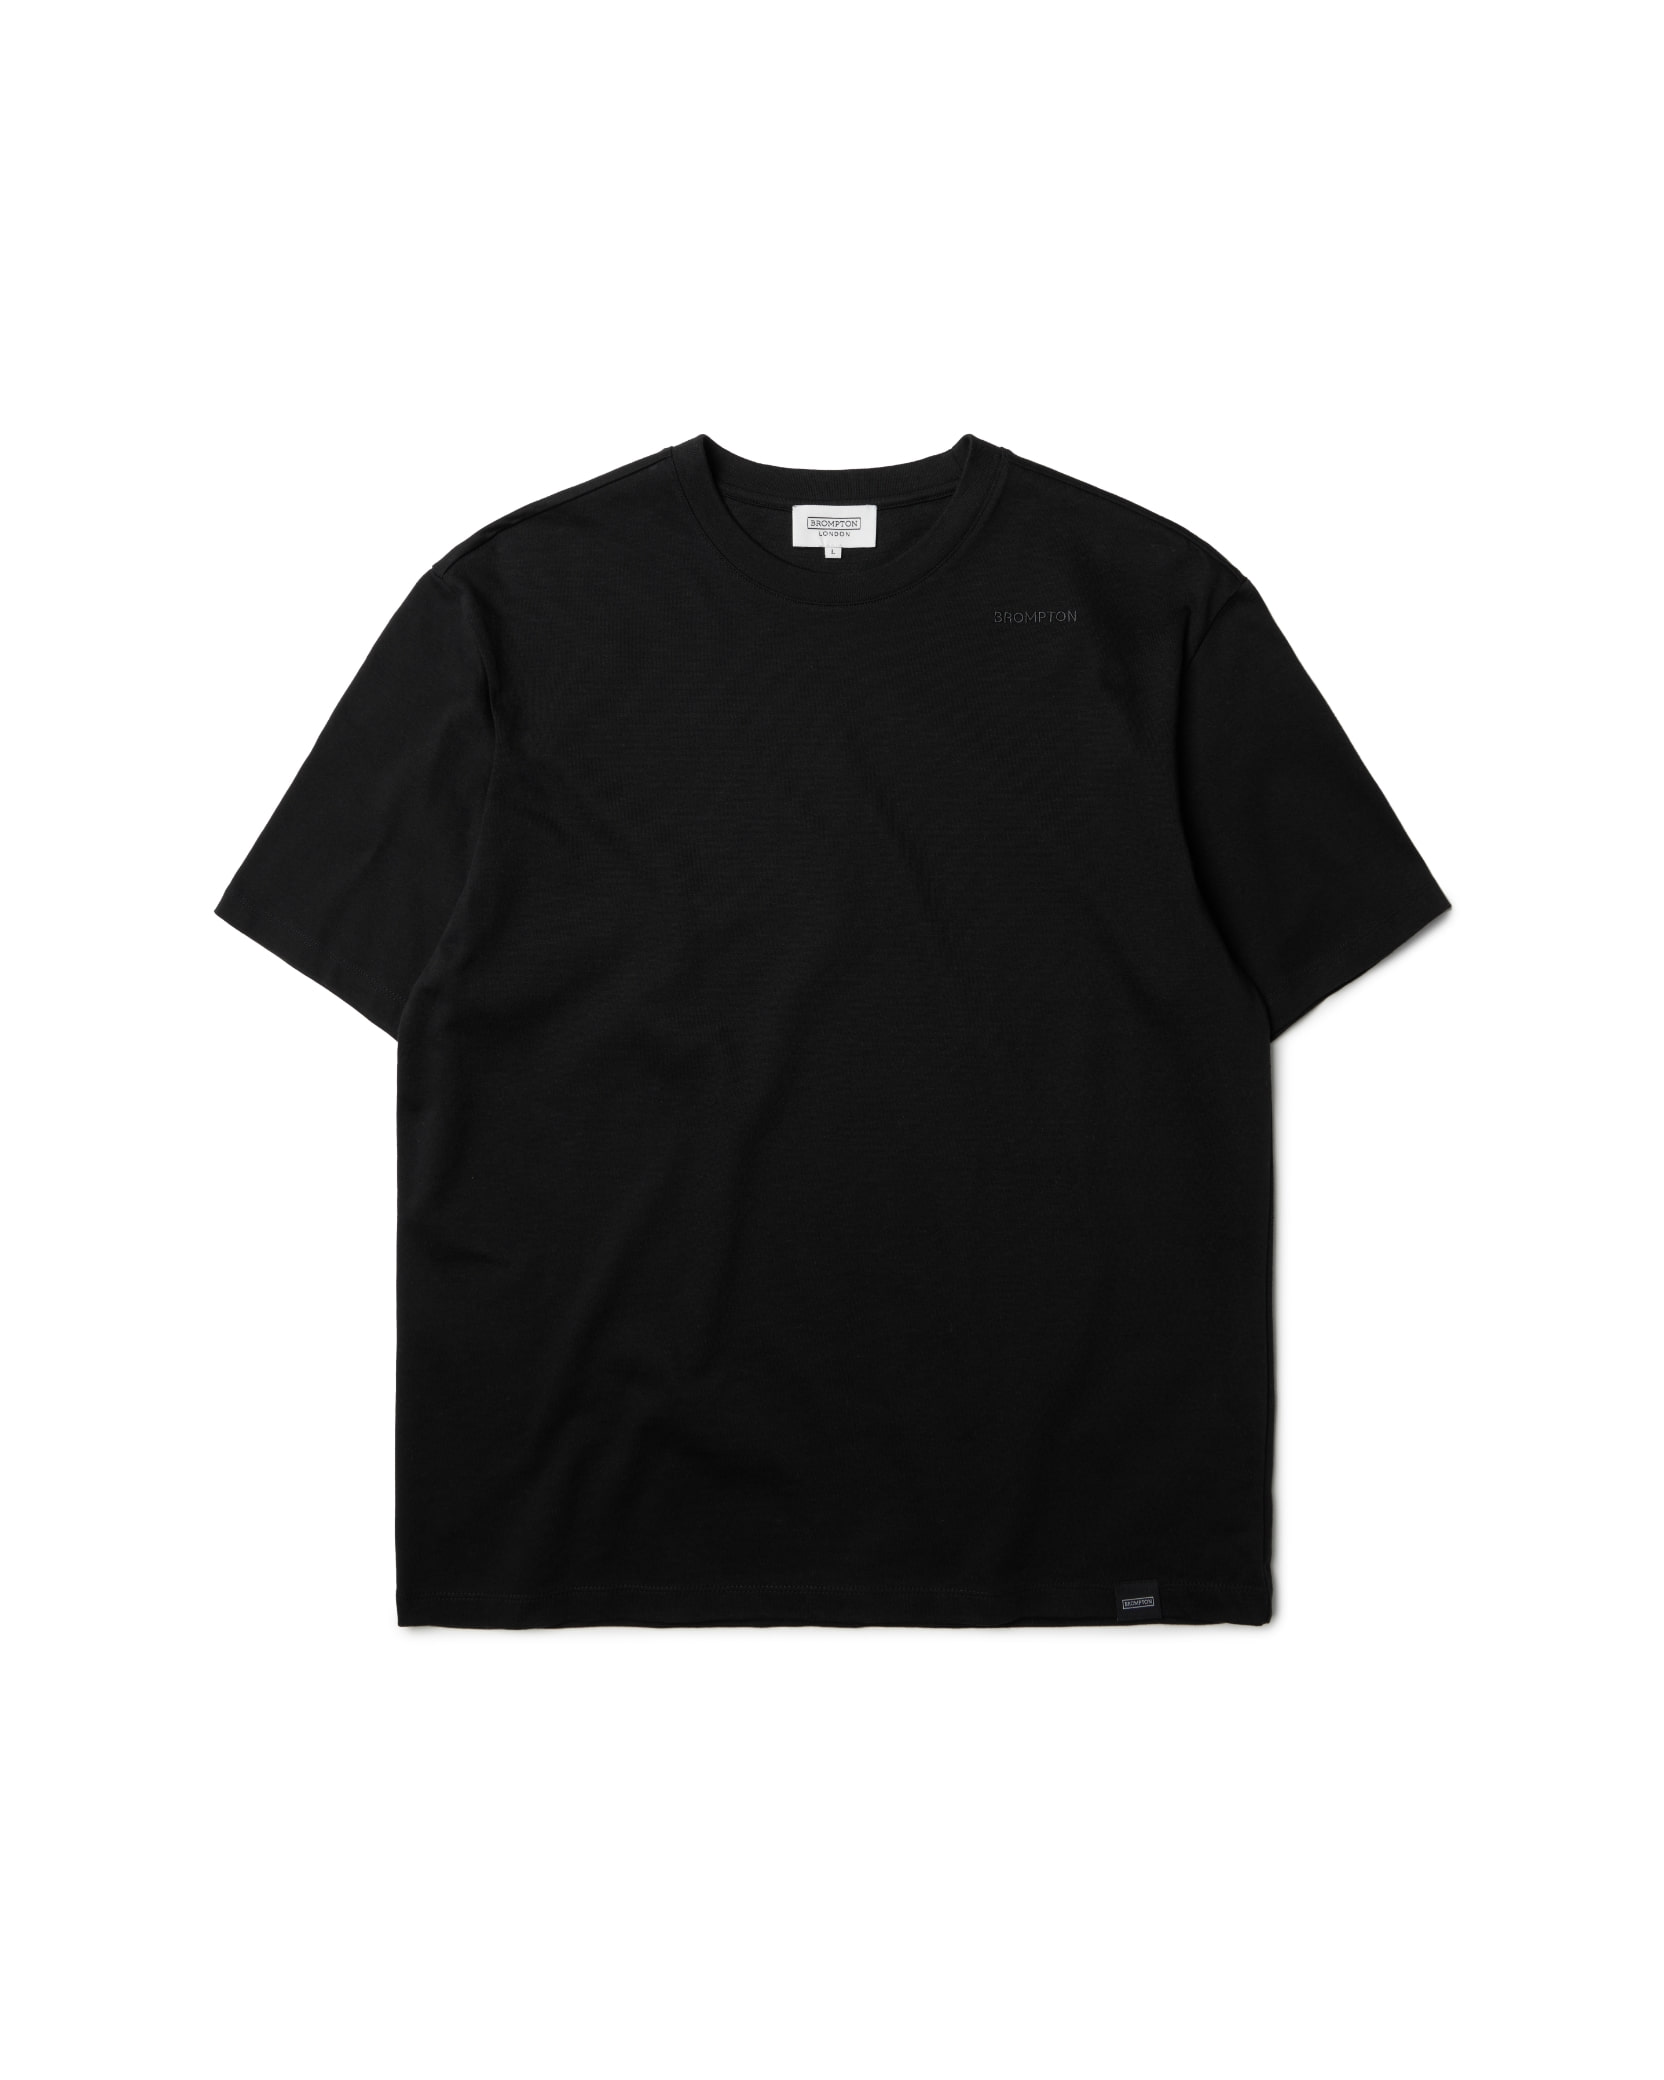 EMBROIDERY LOGO OVER FIT HALF SLEEVE TSHIRT-BLACK